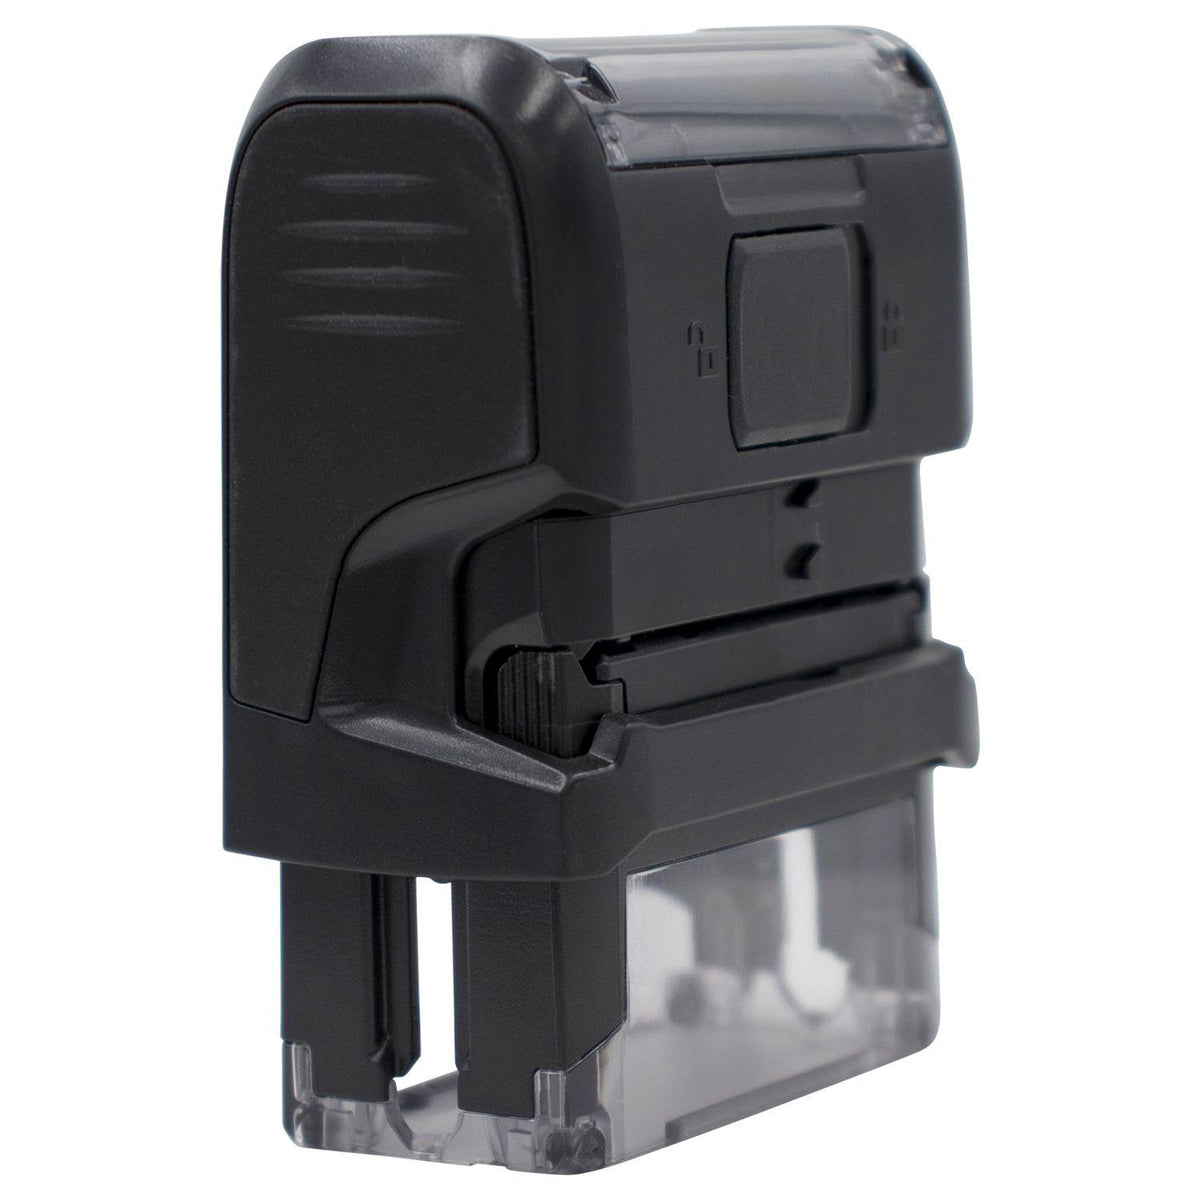 Self-Inking Times Faxed Stamp - Engineer Seal Stamps - Brand_Trodat, Impression Size_Small, Stamp Type_Self-Inking Stamp, Type of Use_General, Type of Use_Office